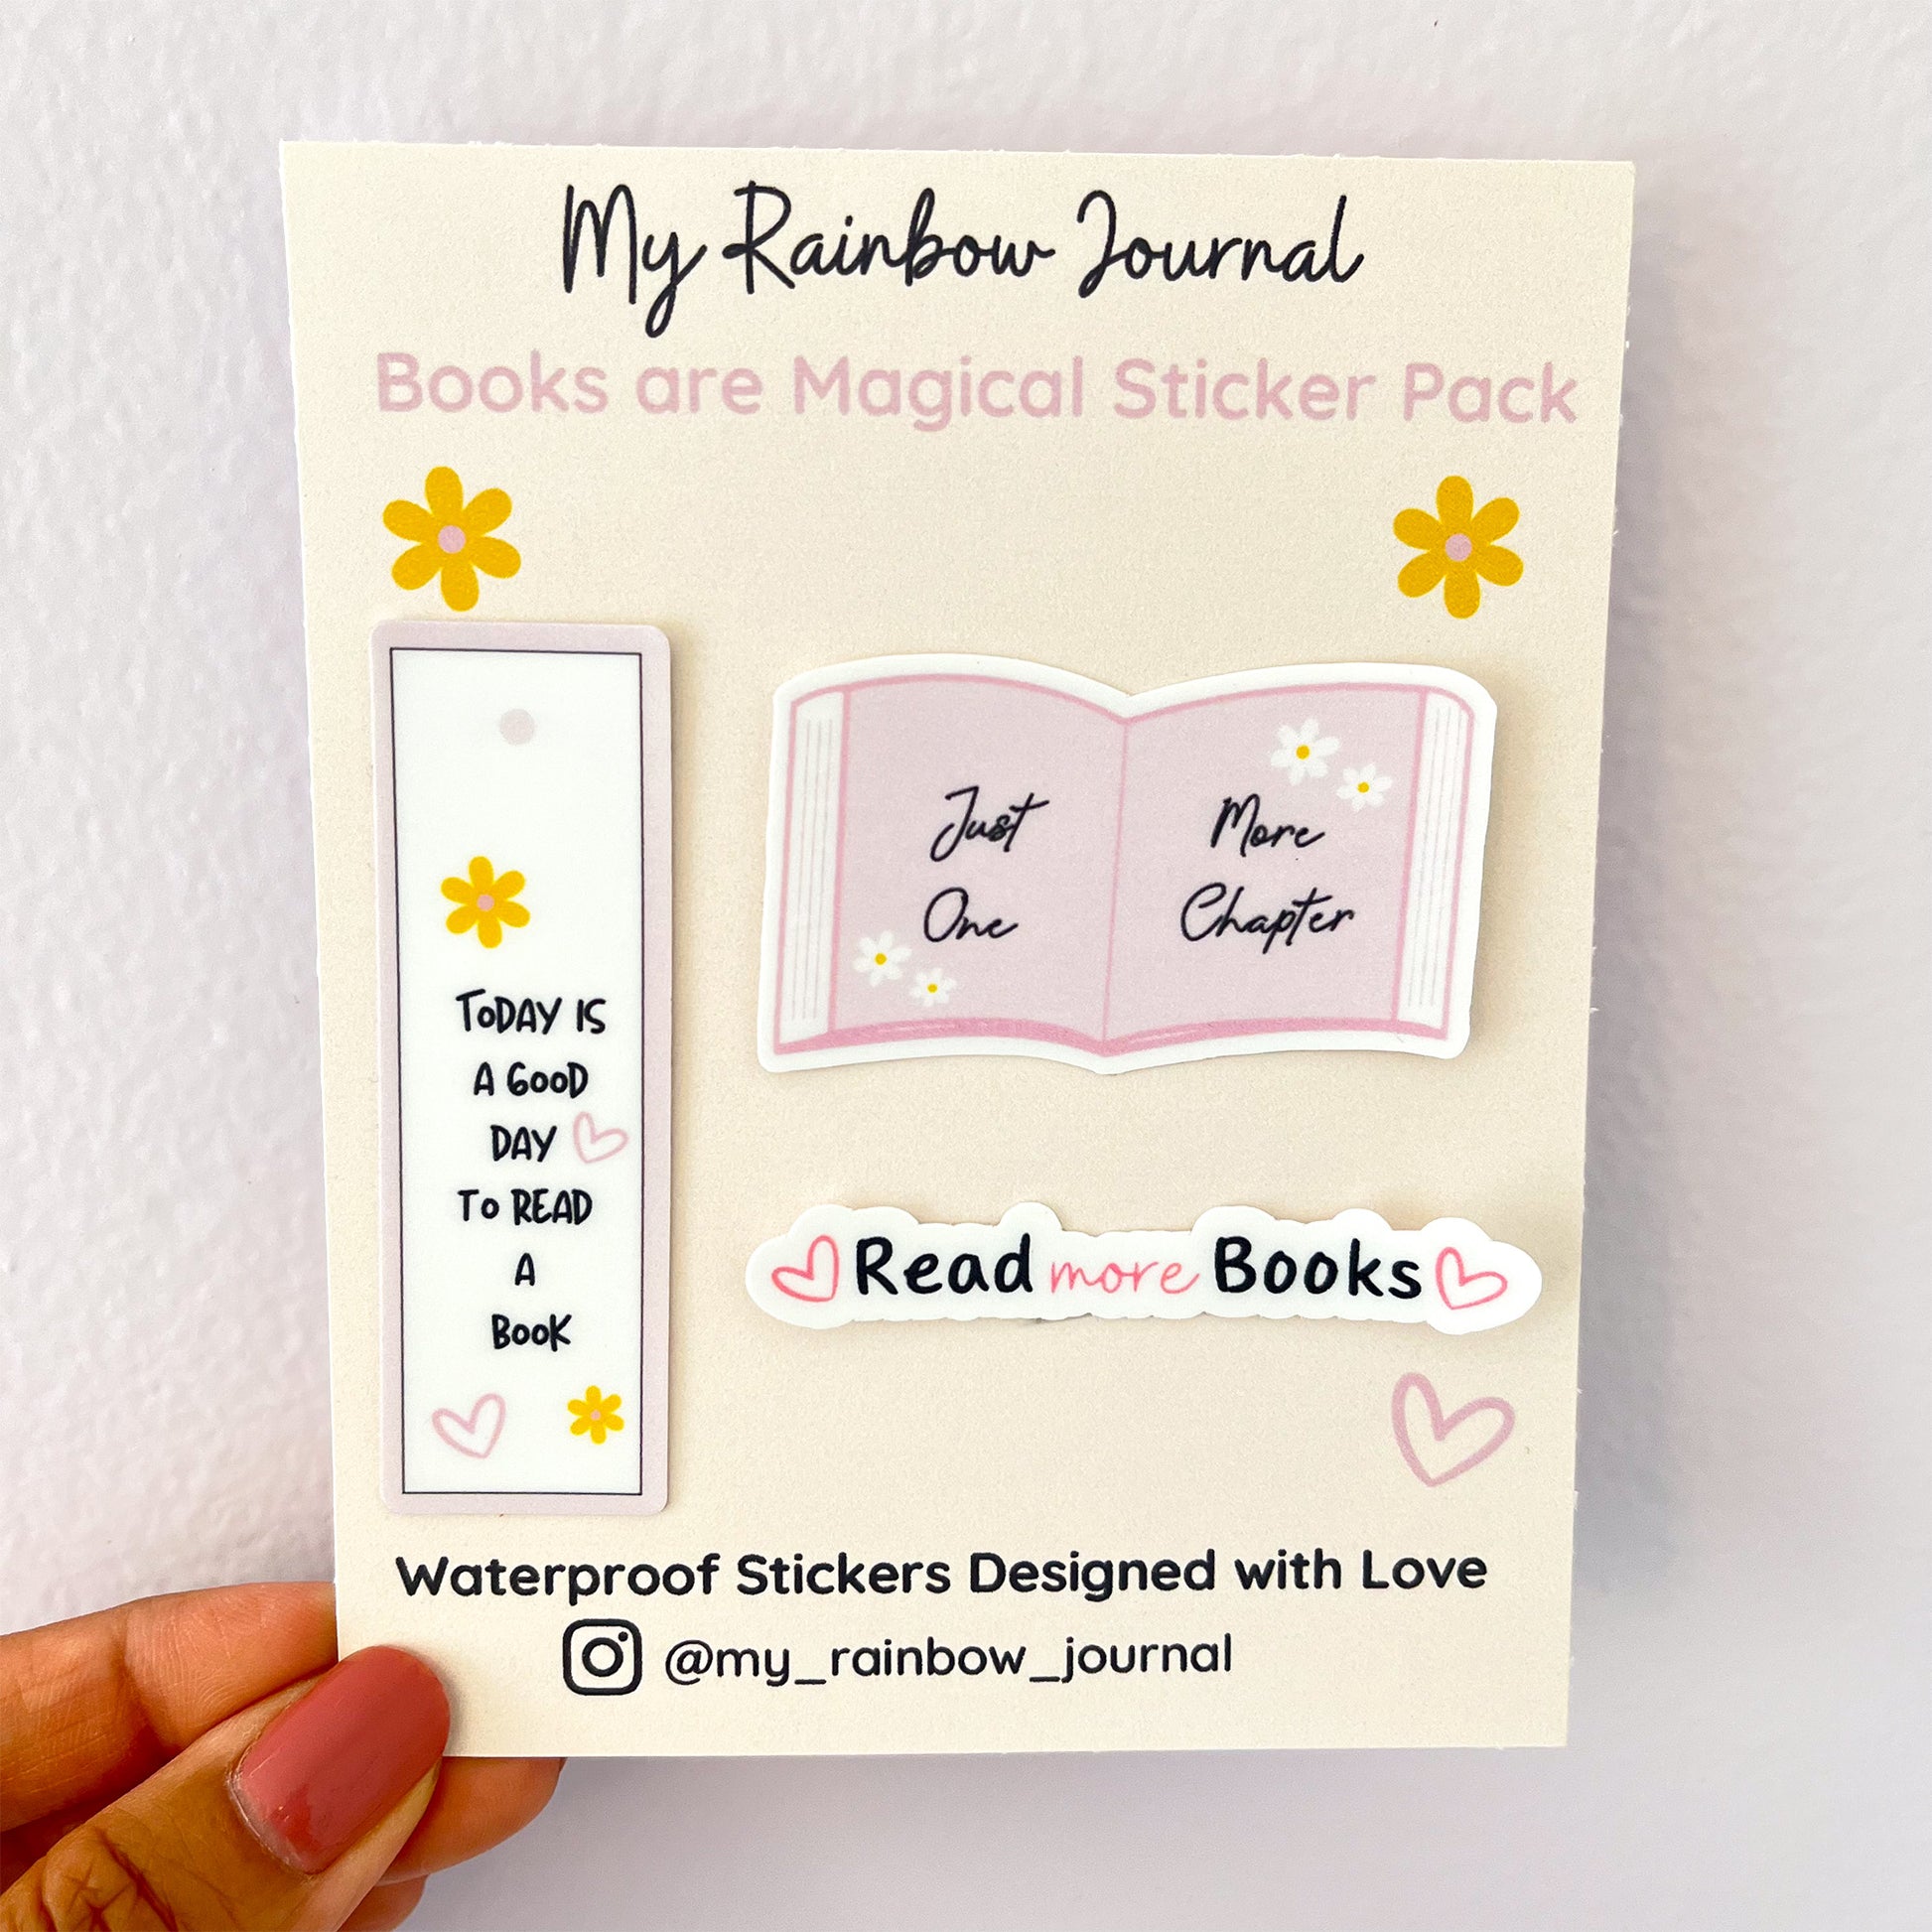 Books are Magical Sticker Pack in packaging